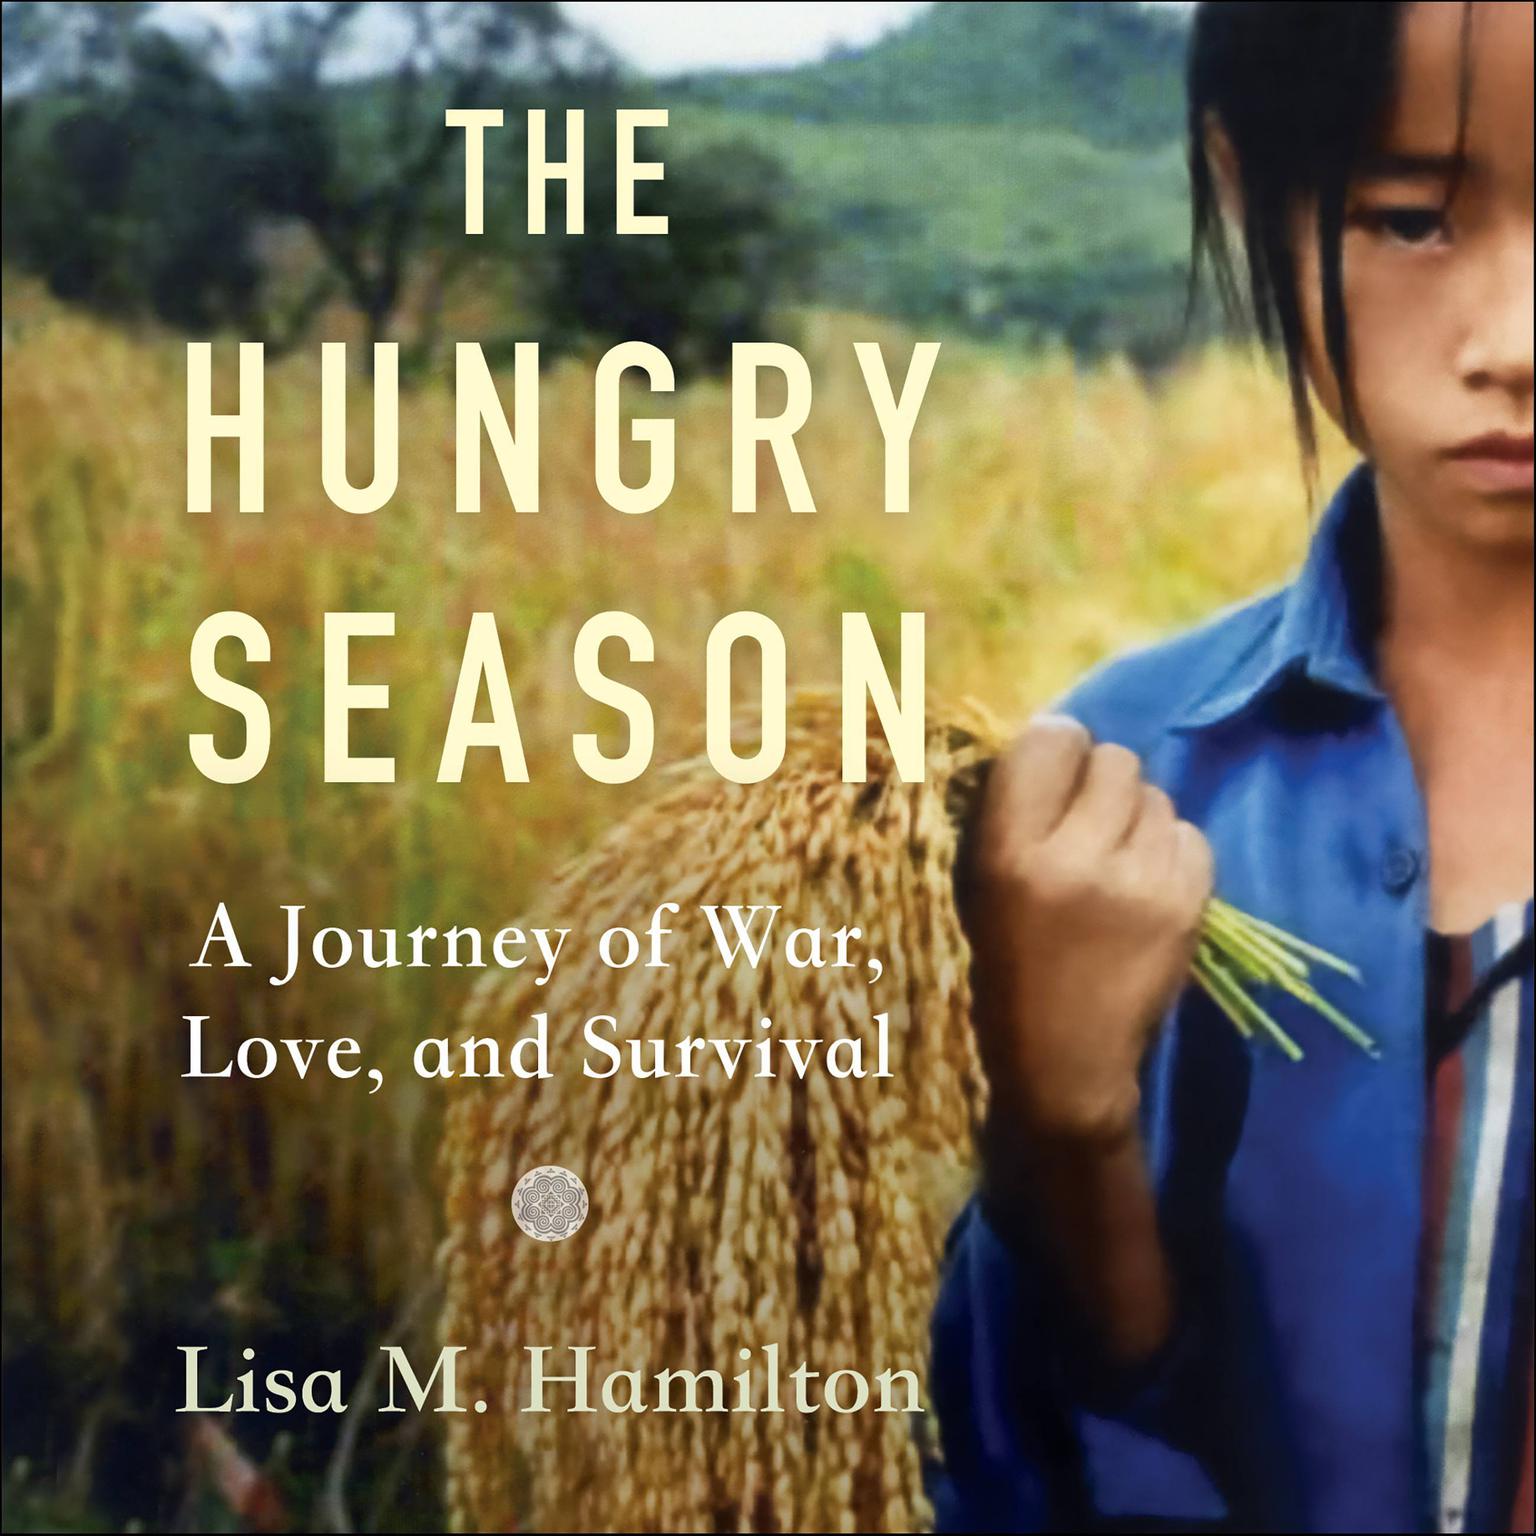 The Hungry Season: A Journey of War, Love, and Survival Audiobook, by Lisa M. Hamilton